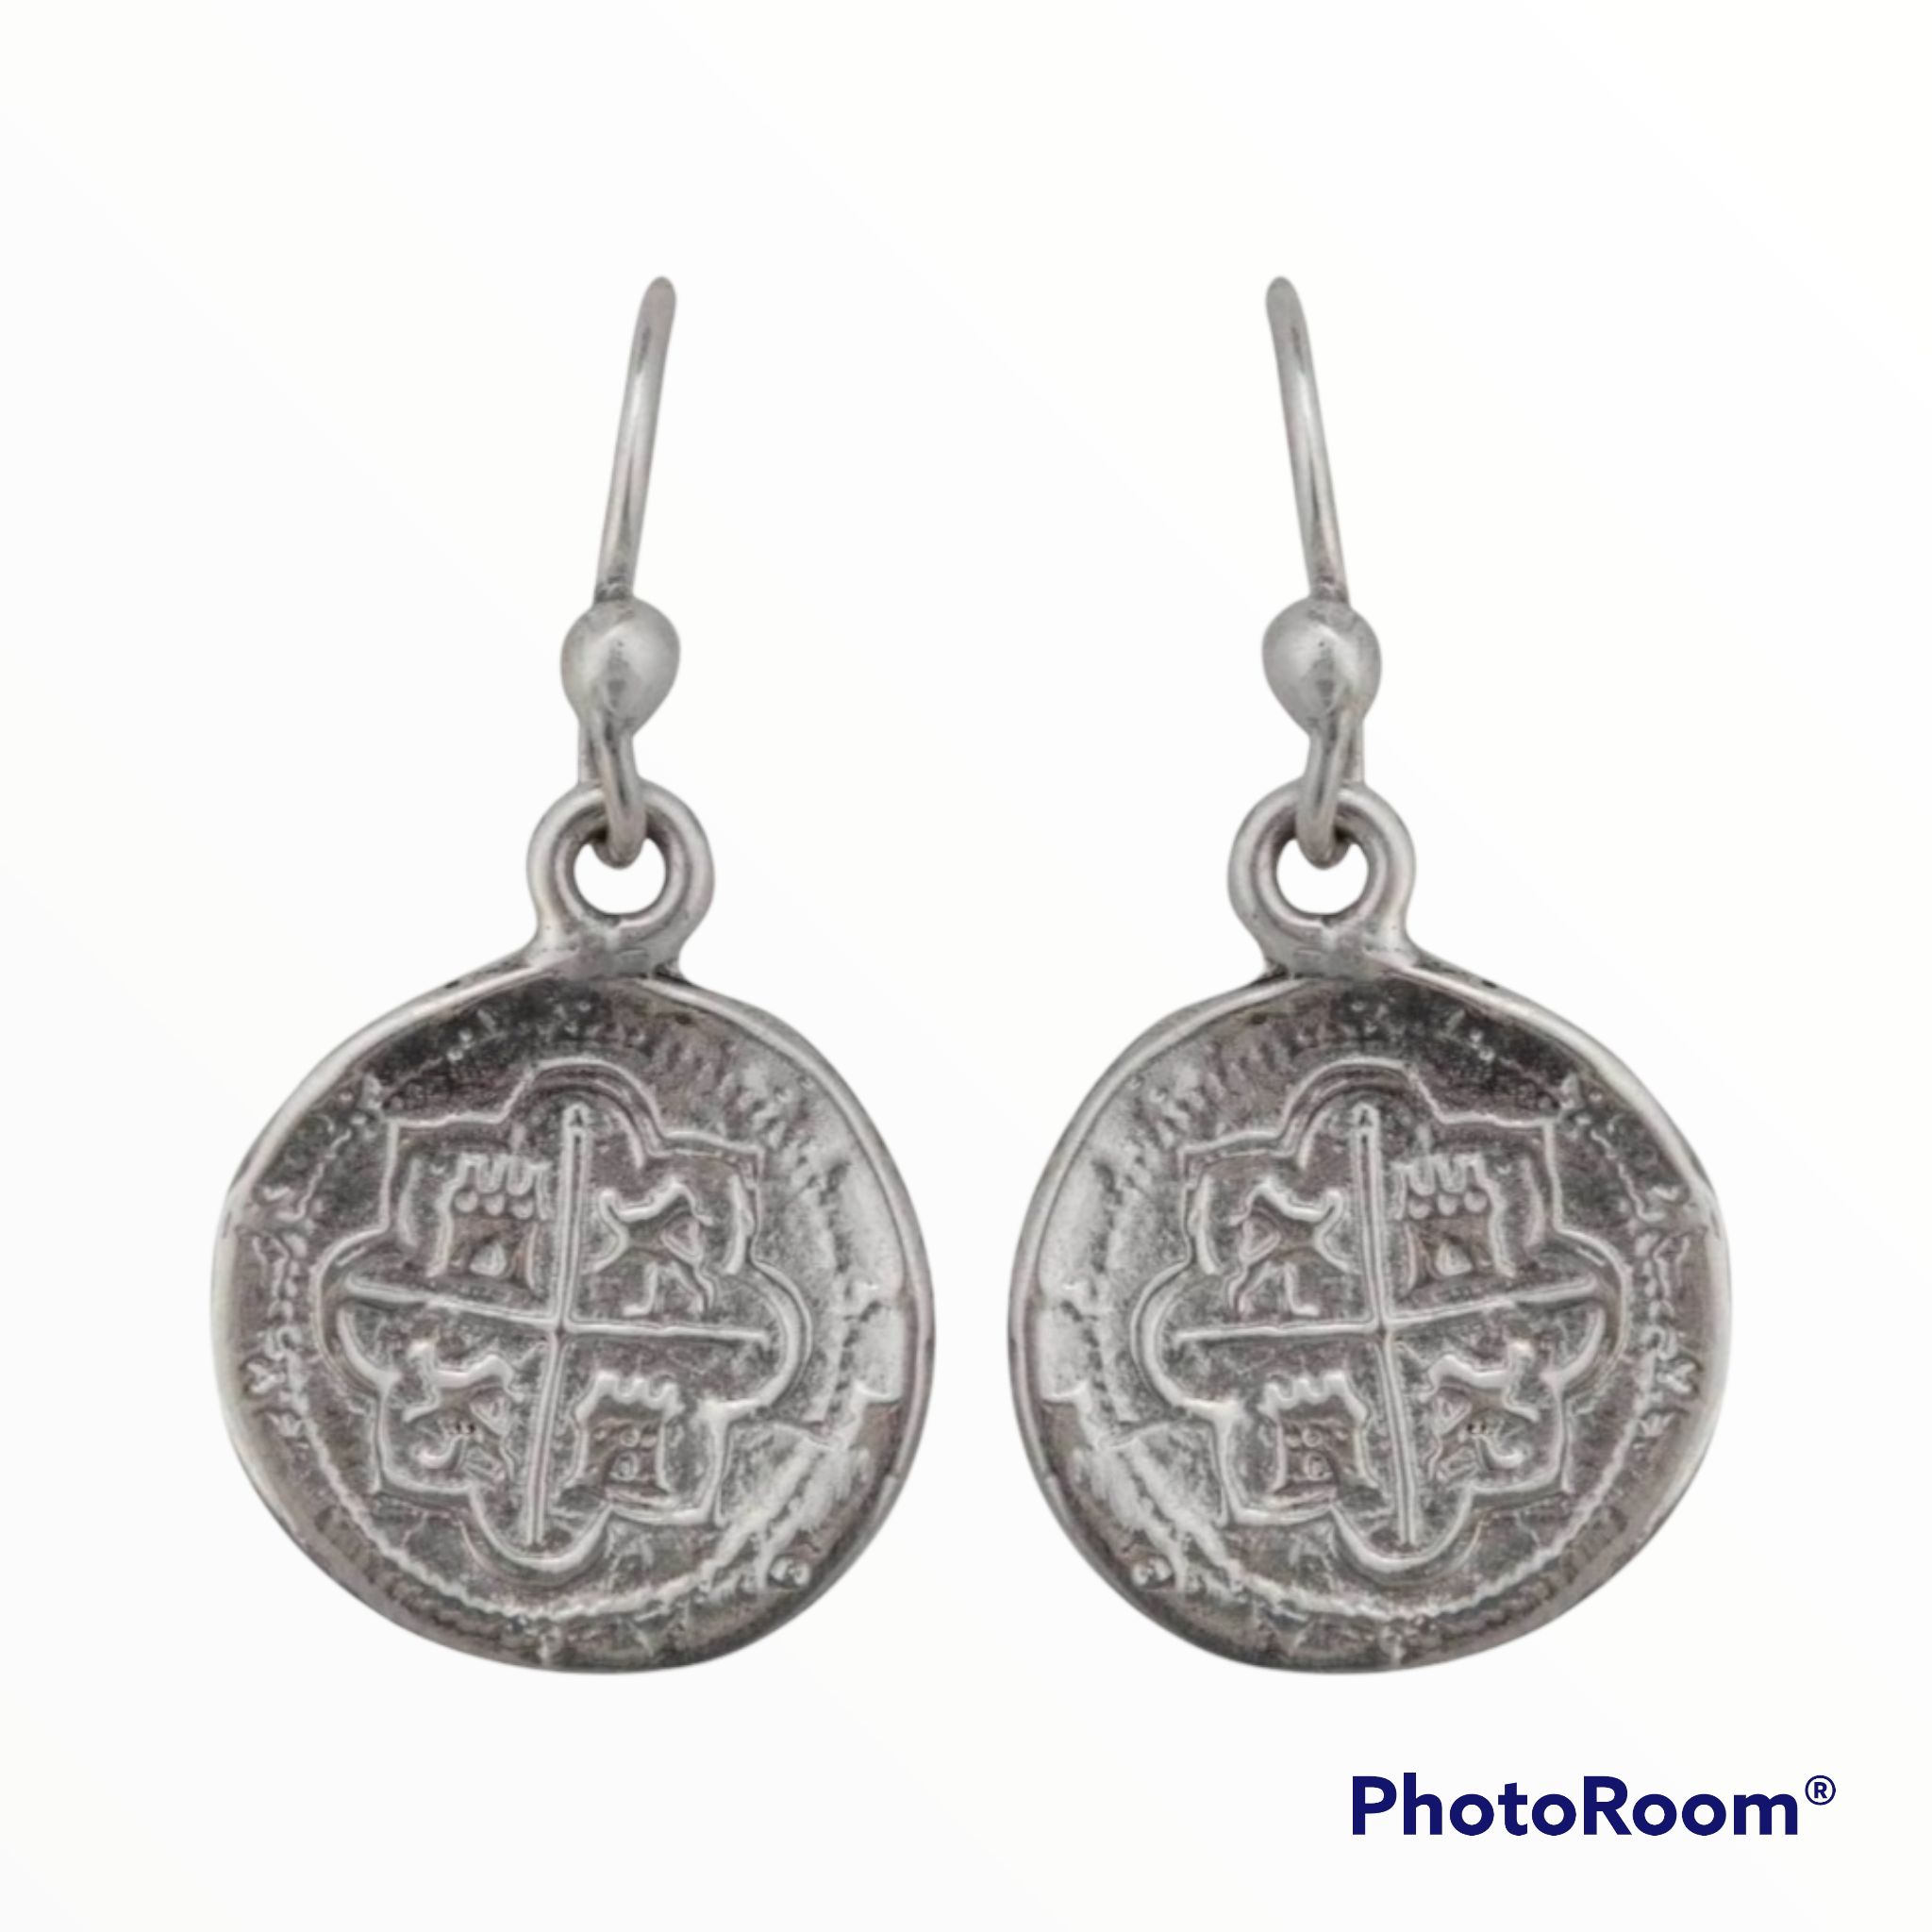 STERLING SILVER REPLICA SPANISH COIN DROP EARRINGS